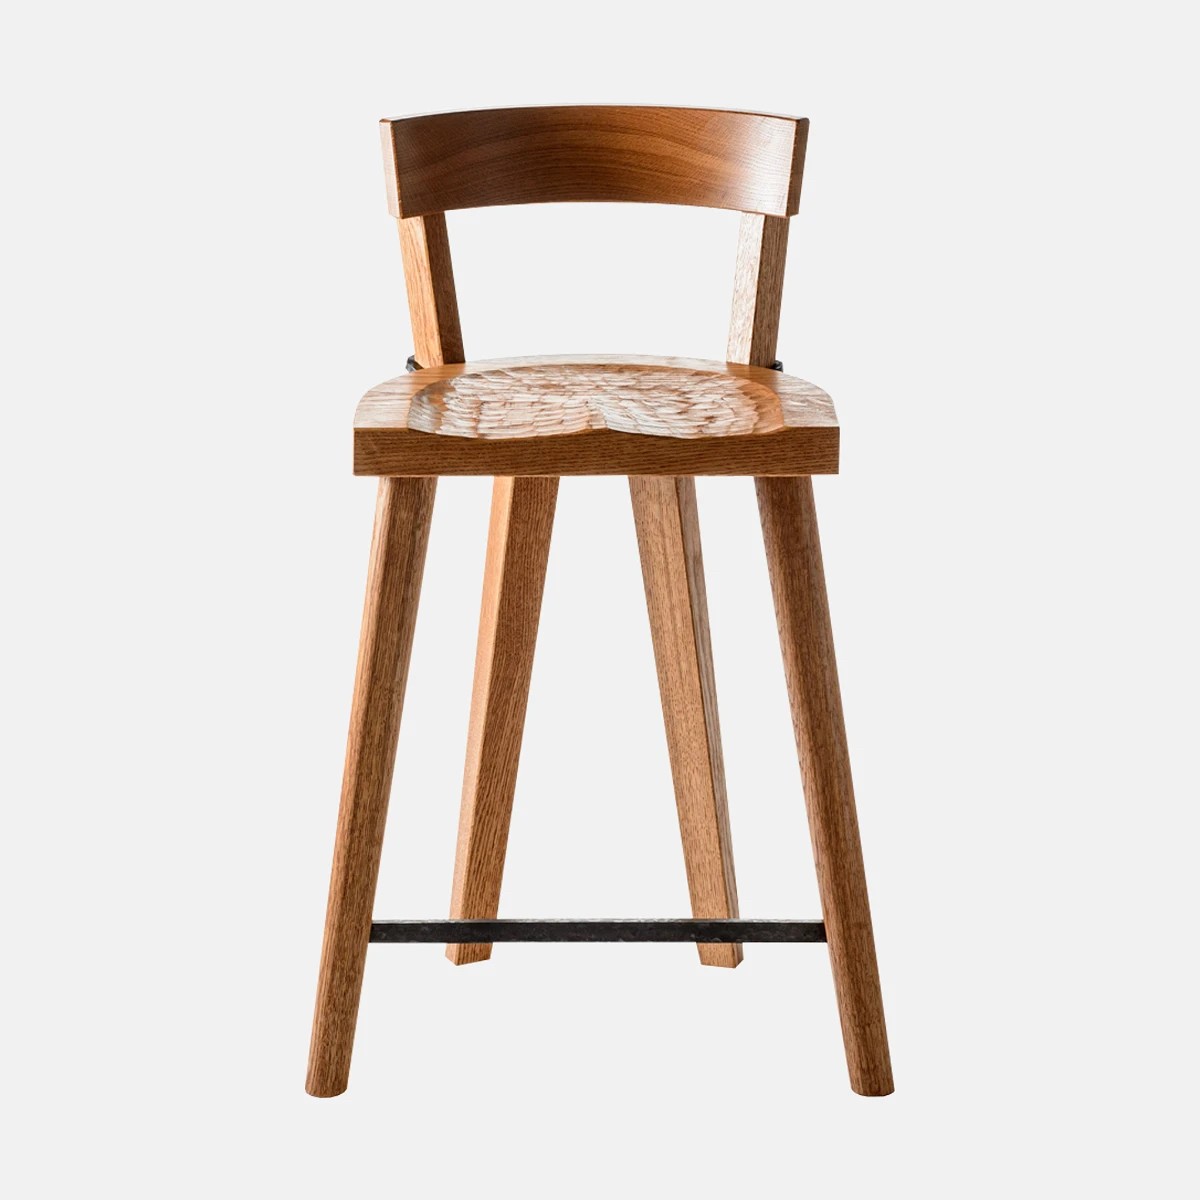 a wooden stool with a seat made out of wood